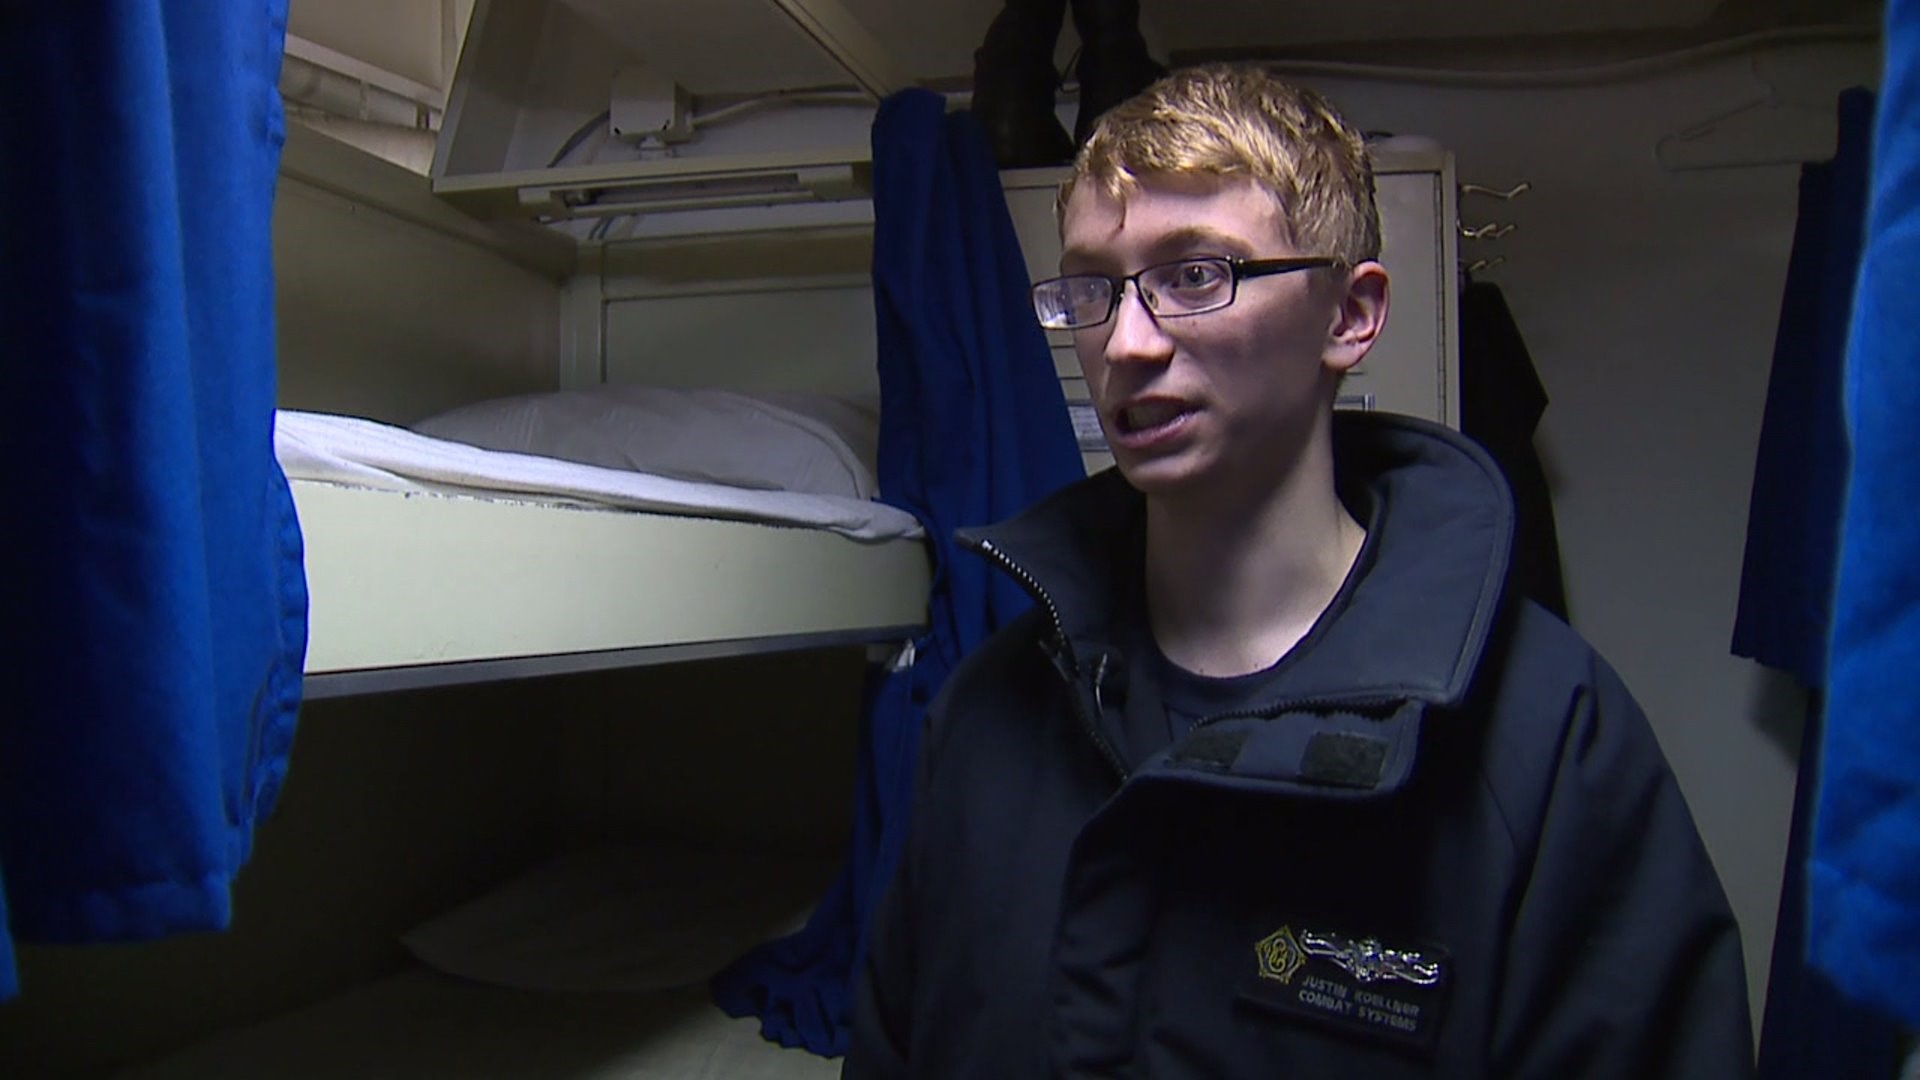 Behind the scenes with ITSA Justin Koellner onboard the USS Dwight D. Eisenhower